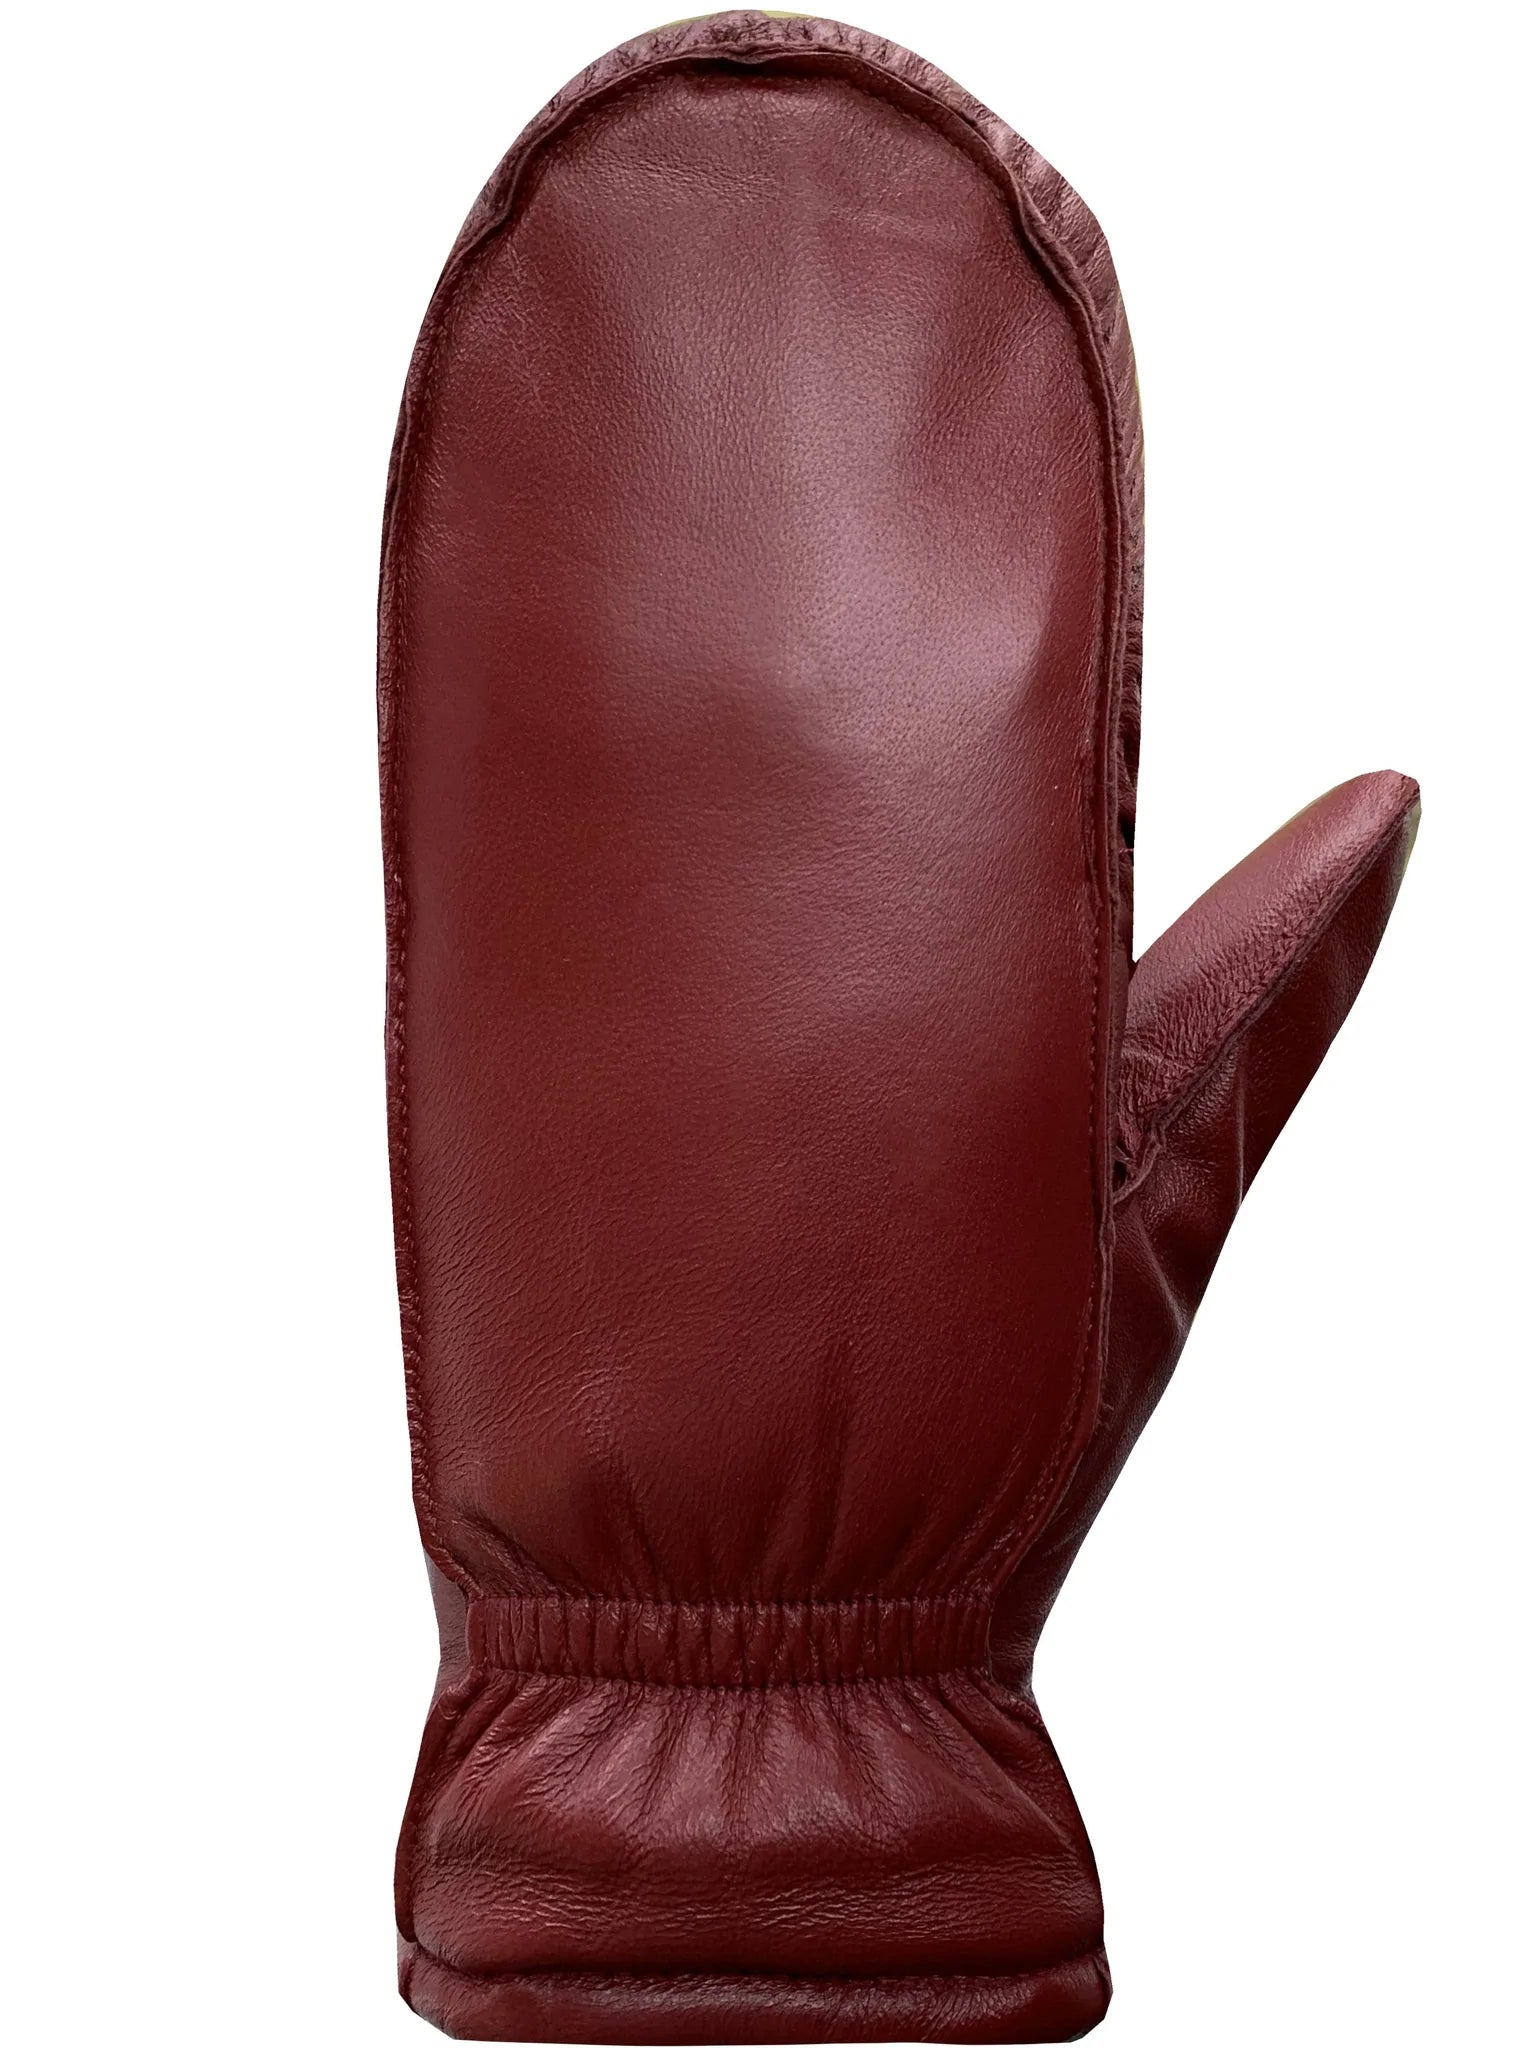 Auclair 7B810 Leather Finger Mitts